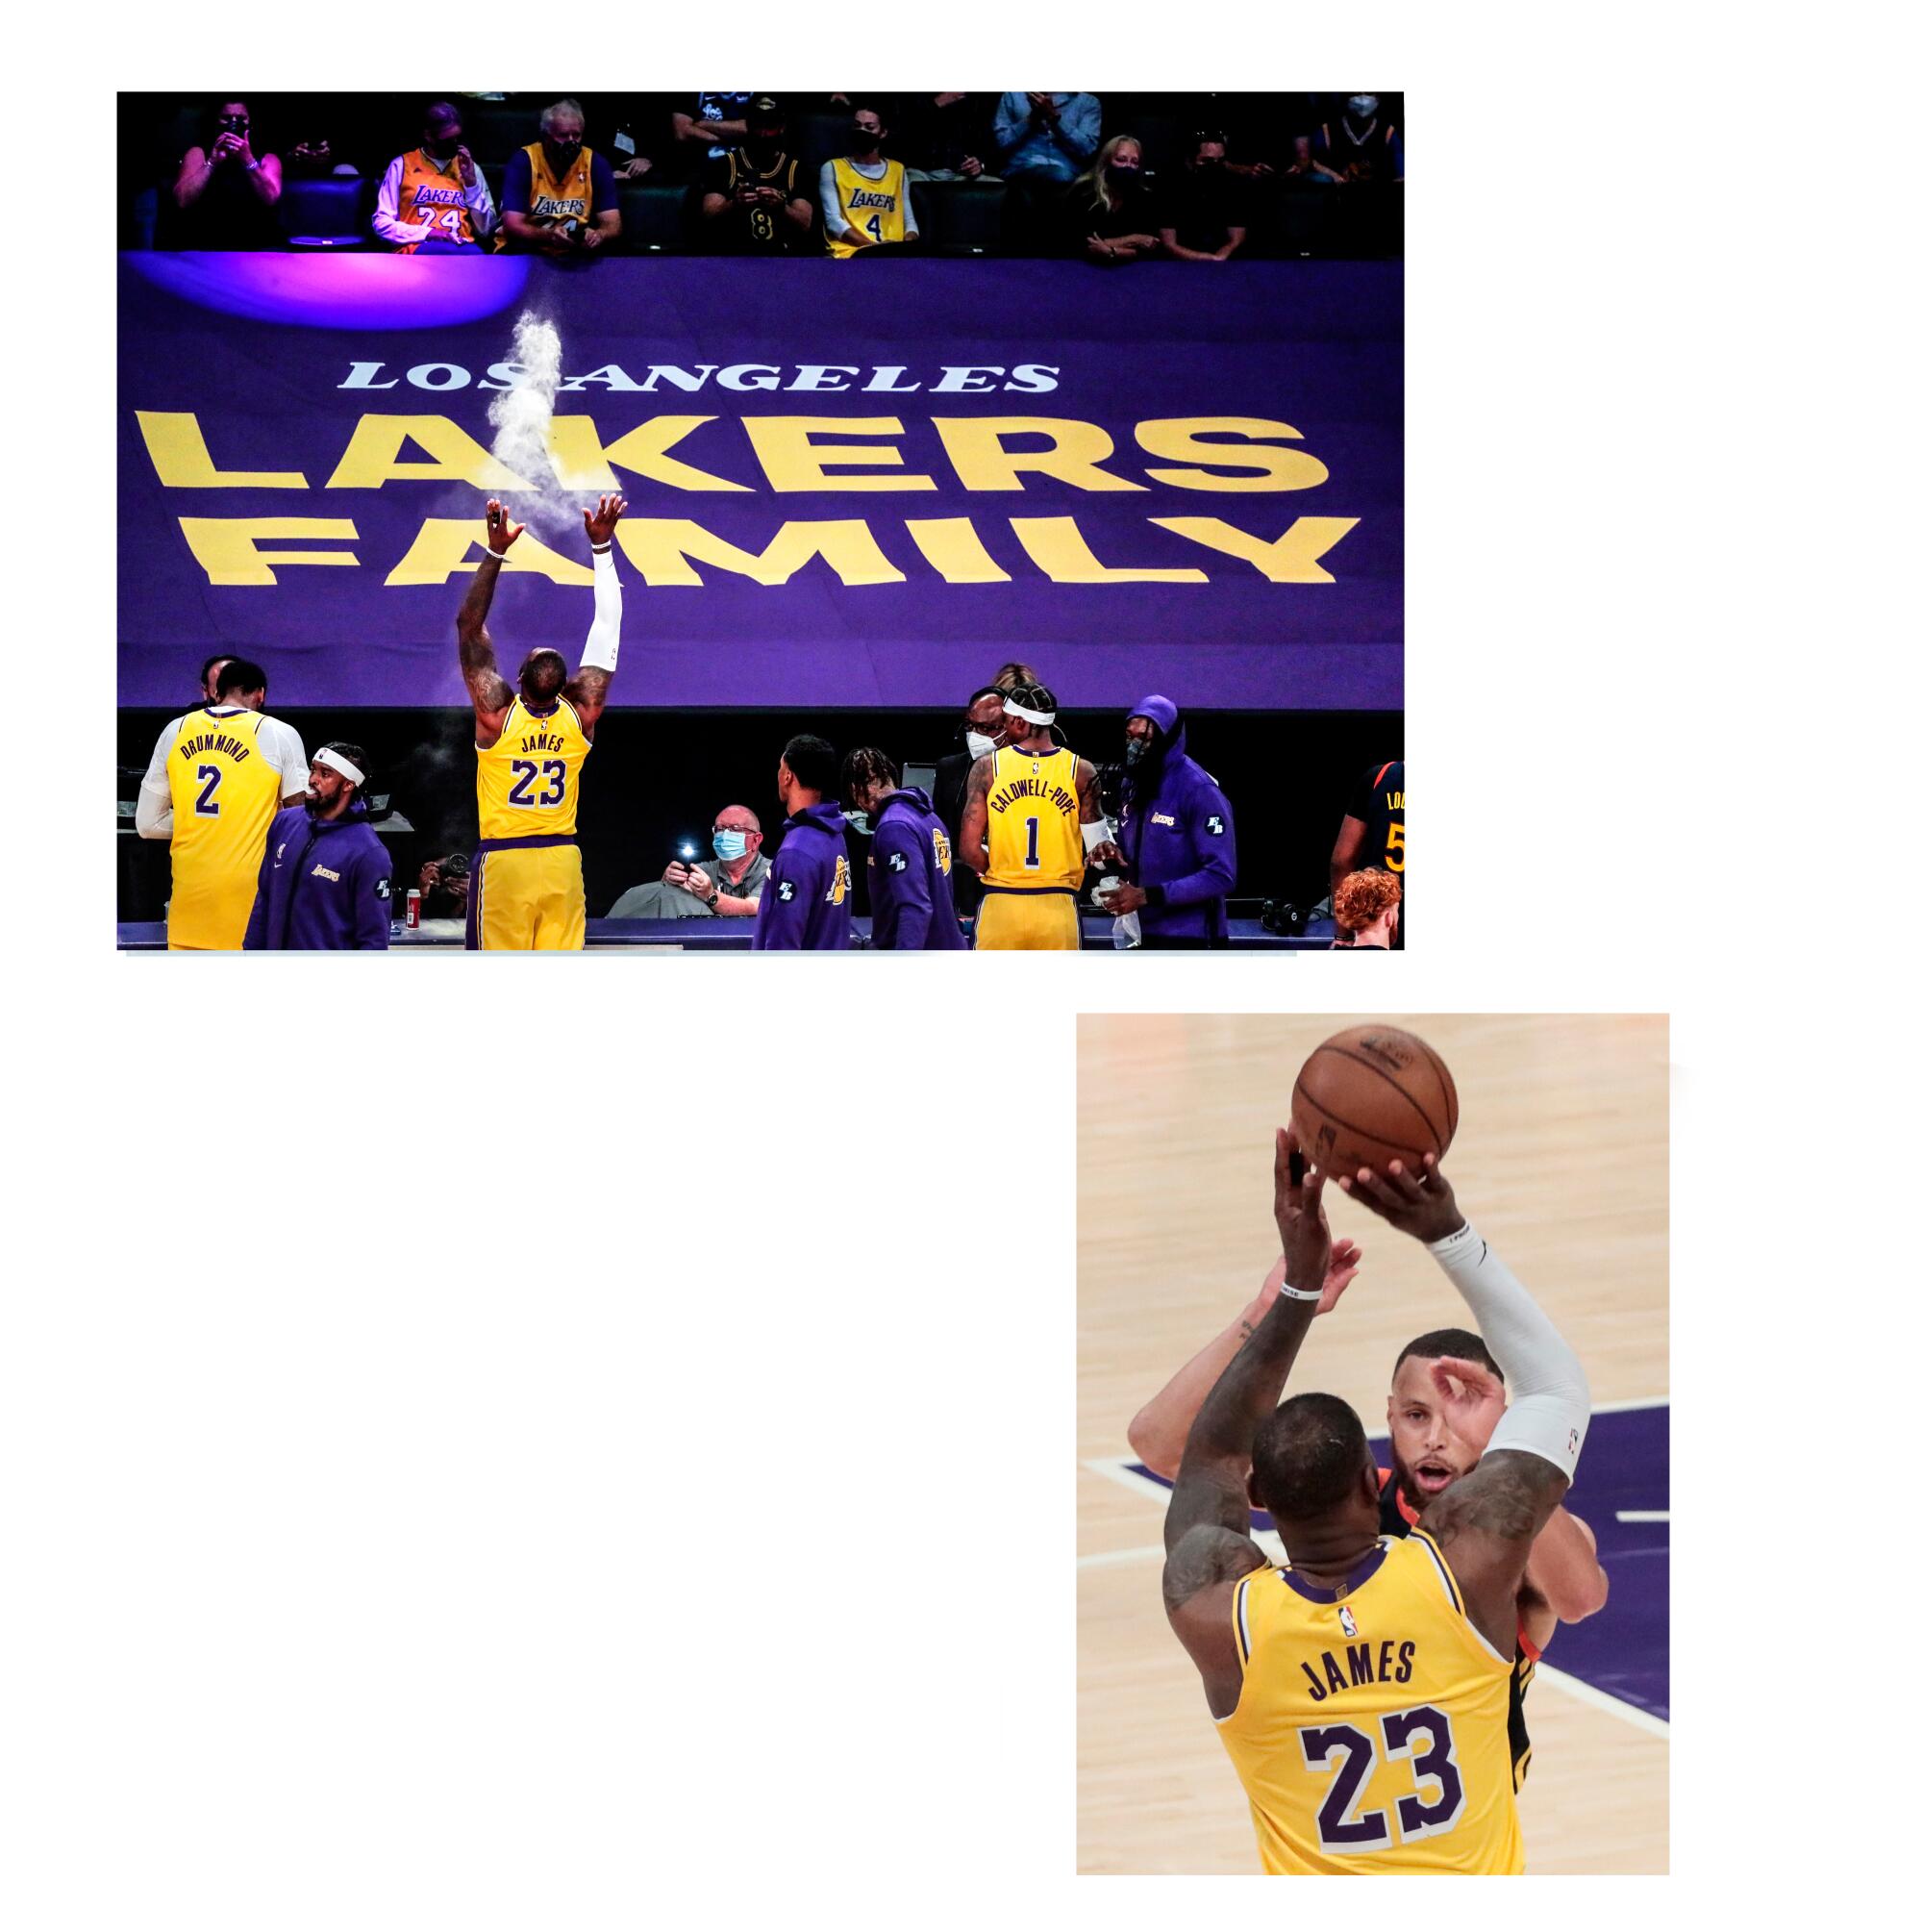 Top: A sign reads, "Los Angeles Lakers family" and a player throws powder; Bottom: LeBron James shoots a basketball